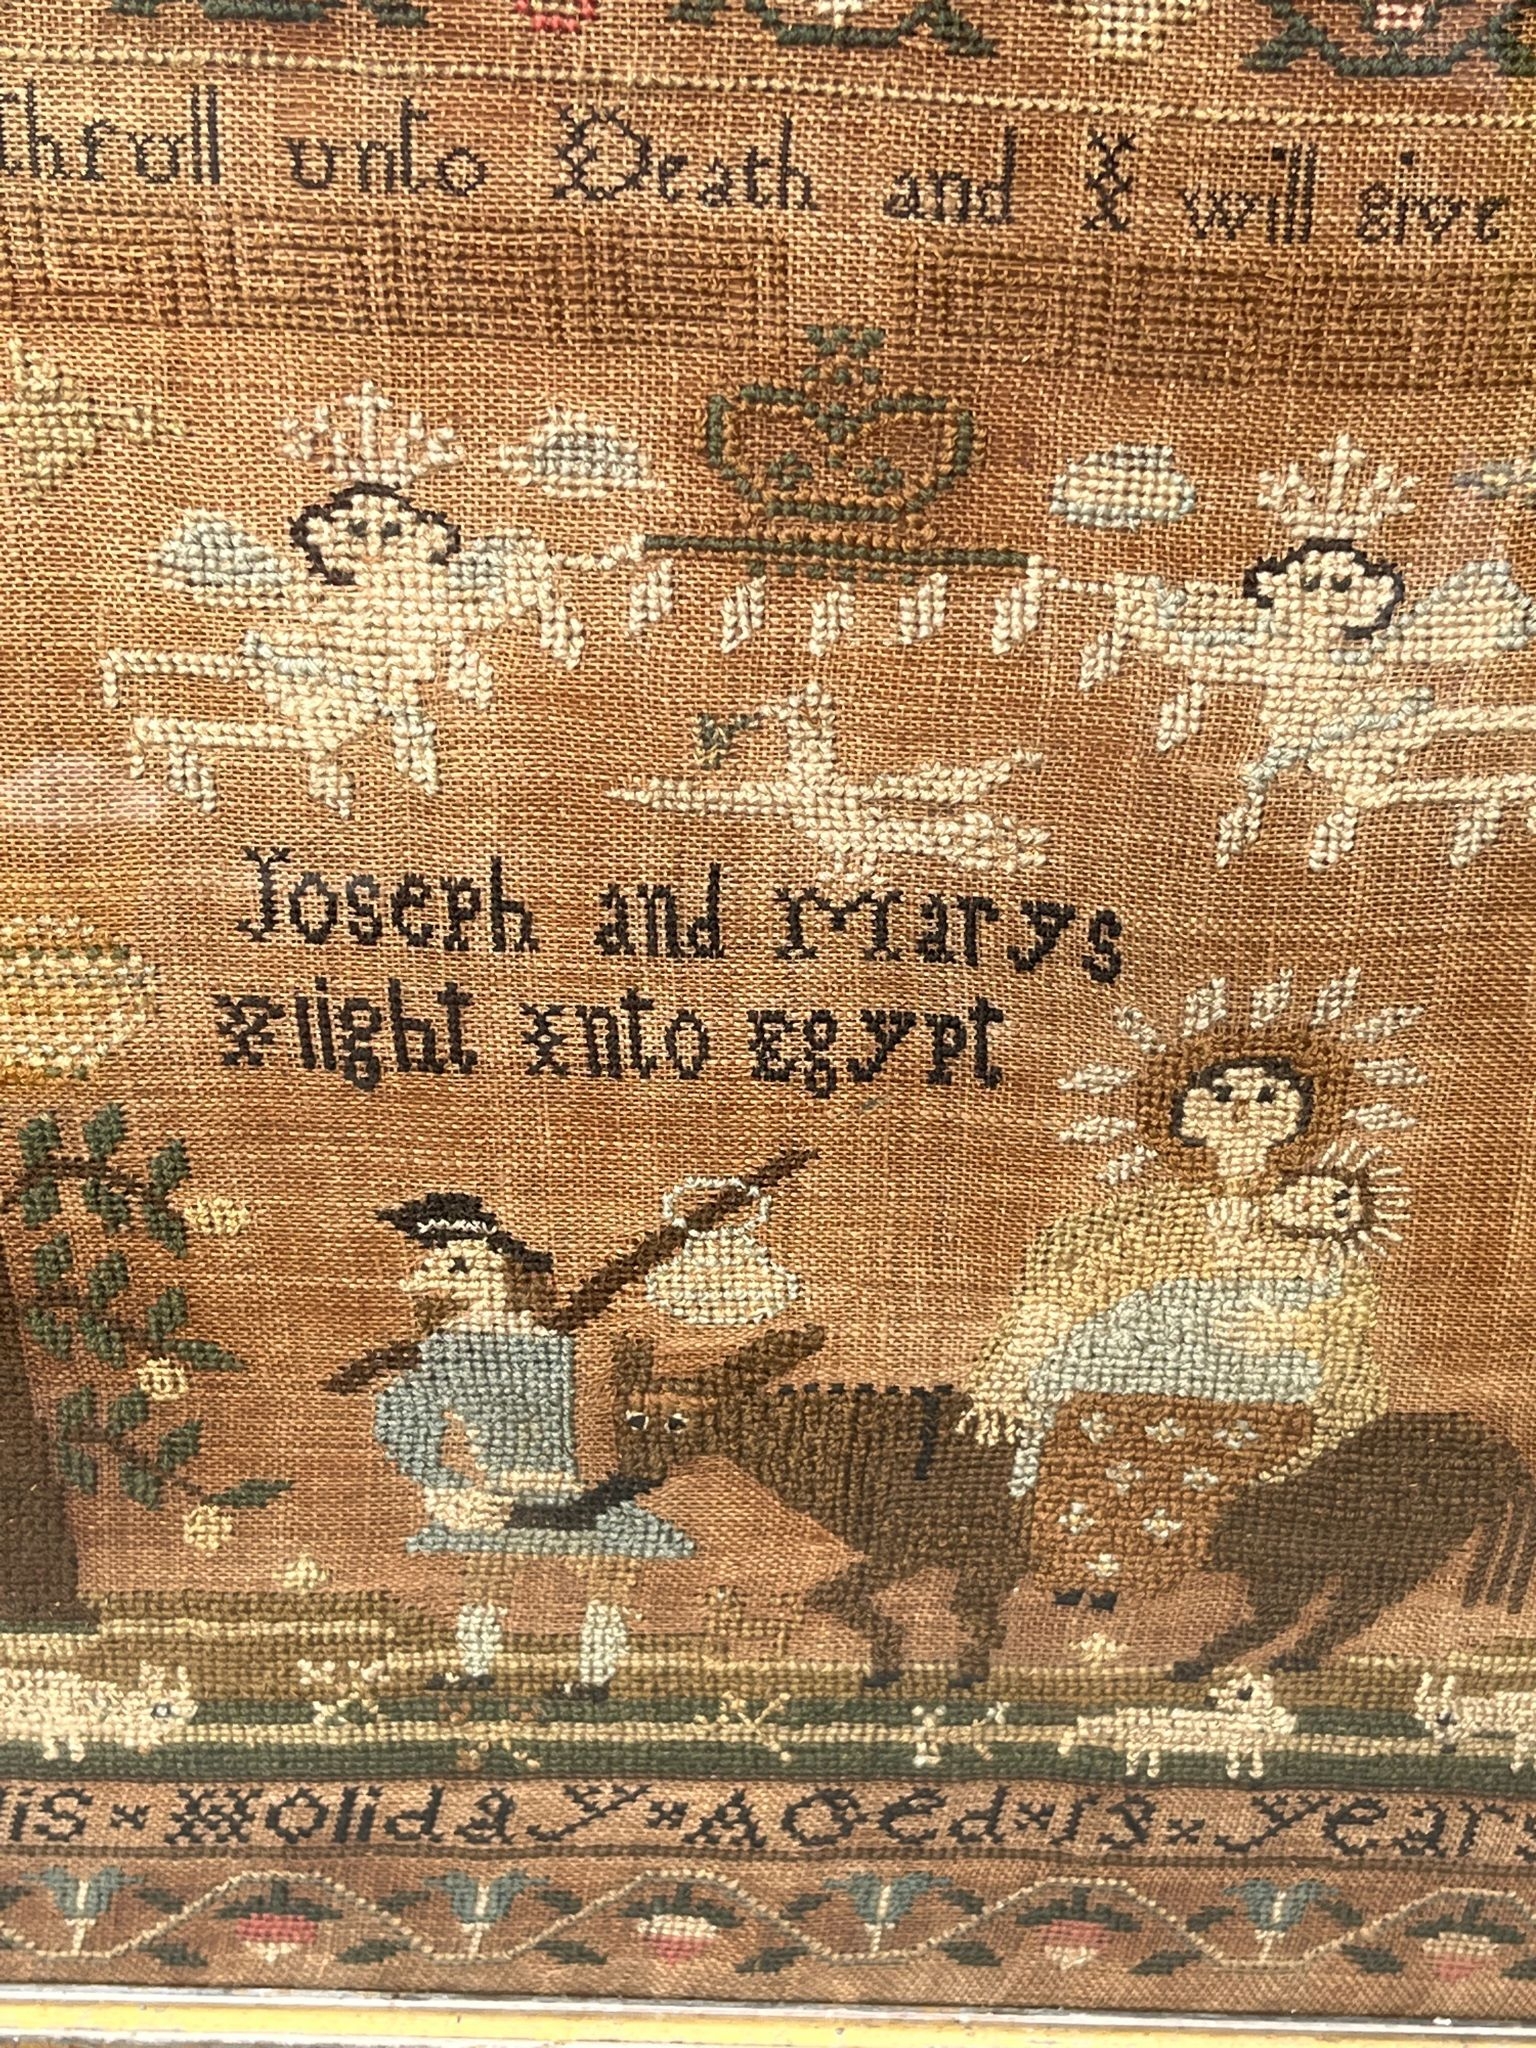 George 111 embroidery sampler of mary & josephs flight to egypt by ellis holiday aged 13 years - Image 7 of 8